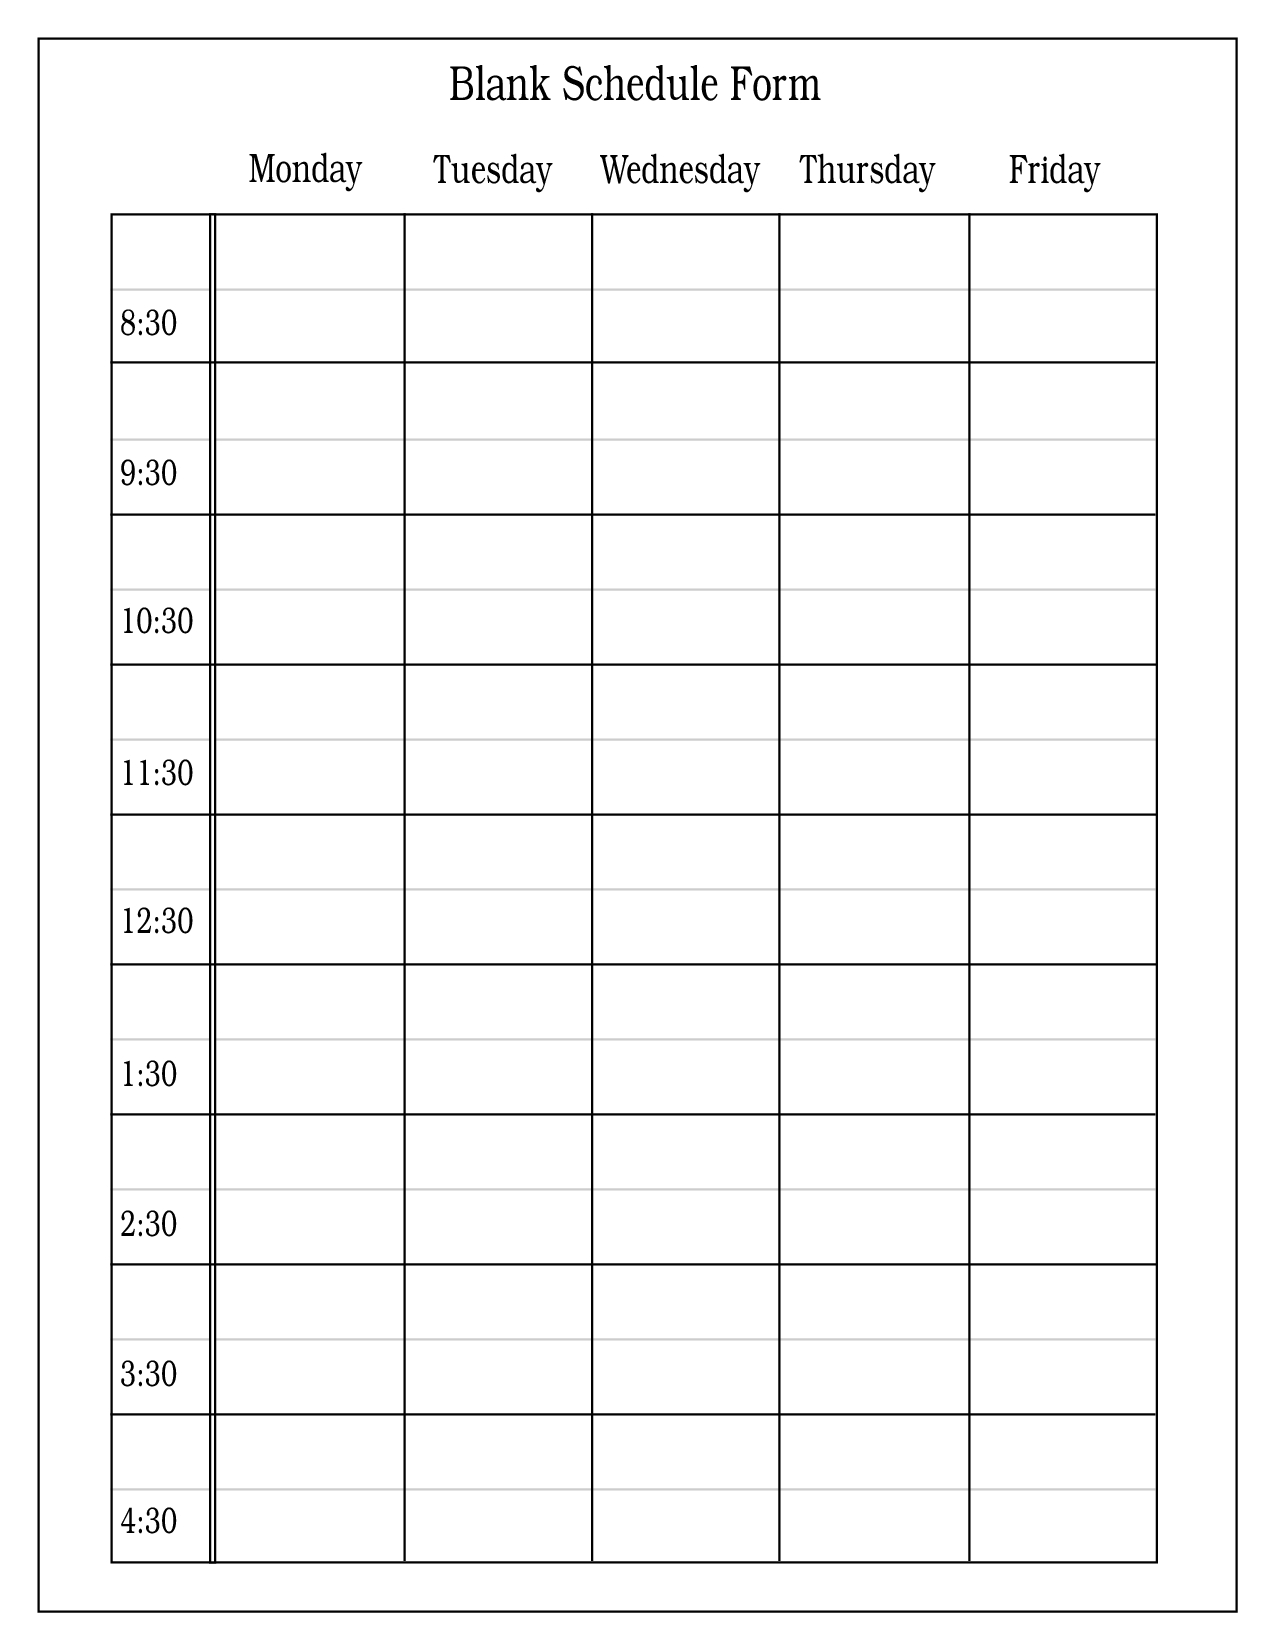 Blank Copy Of Monthly Sign Up Sheet Calendar Schedule